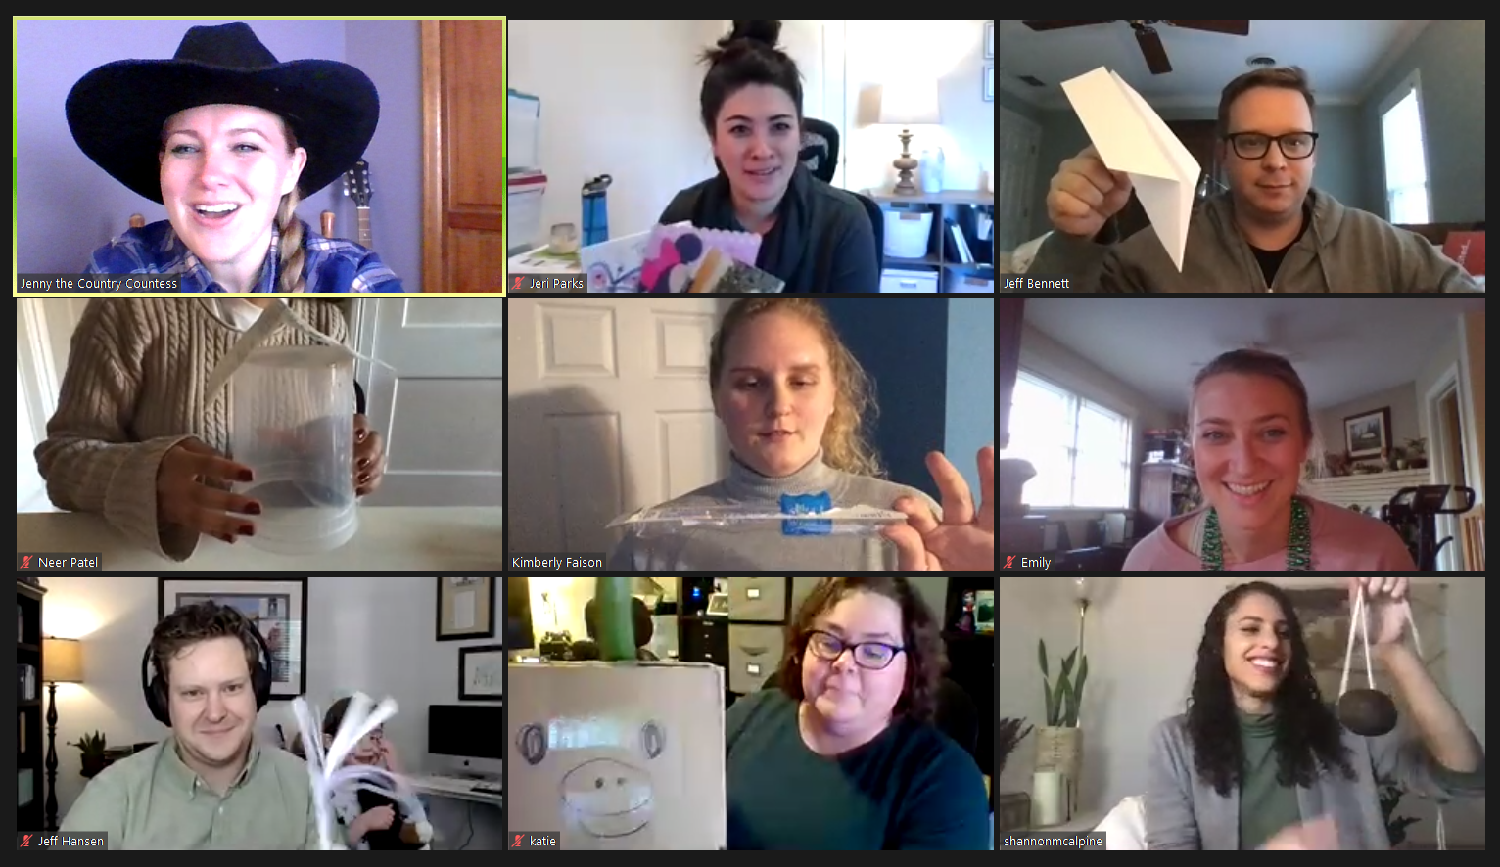 Showing off our goofy side during a virtual scavenger hunt.